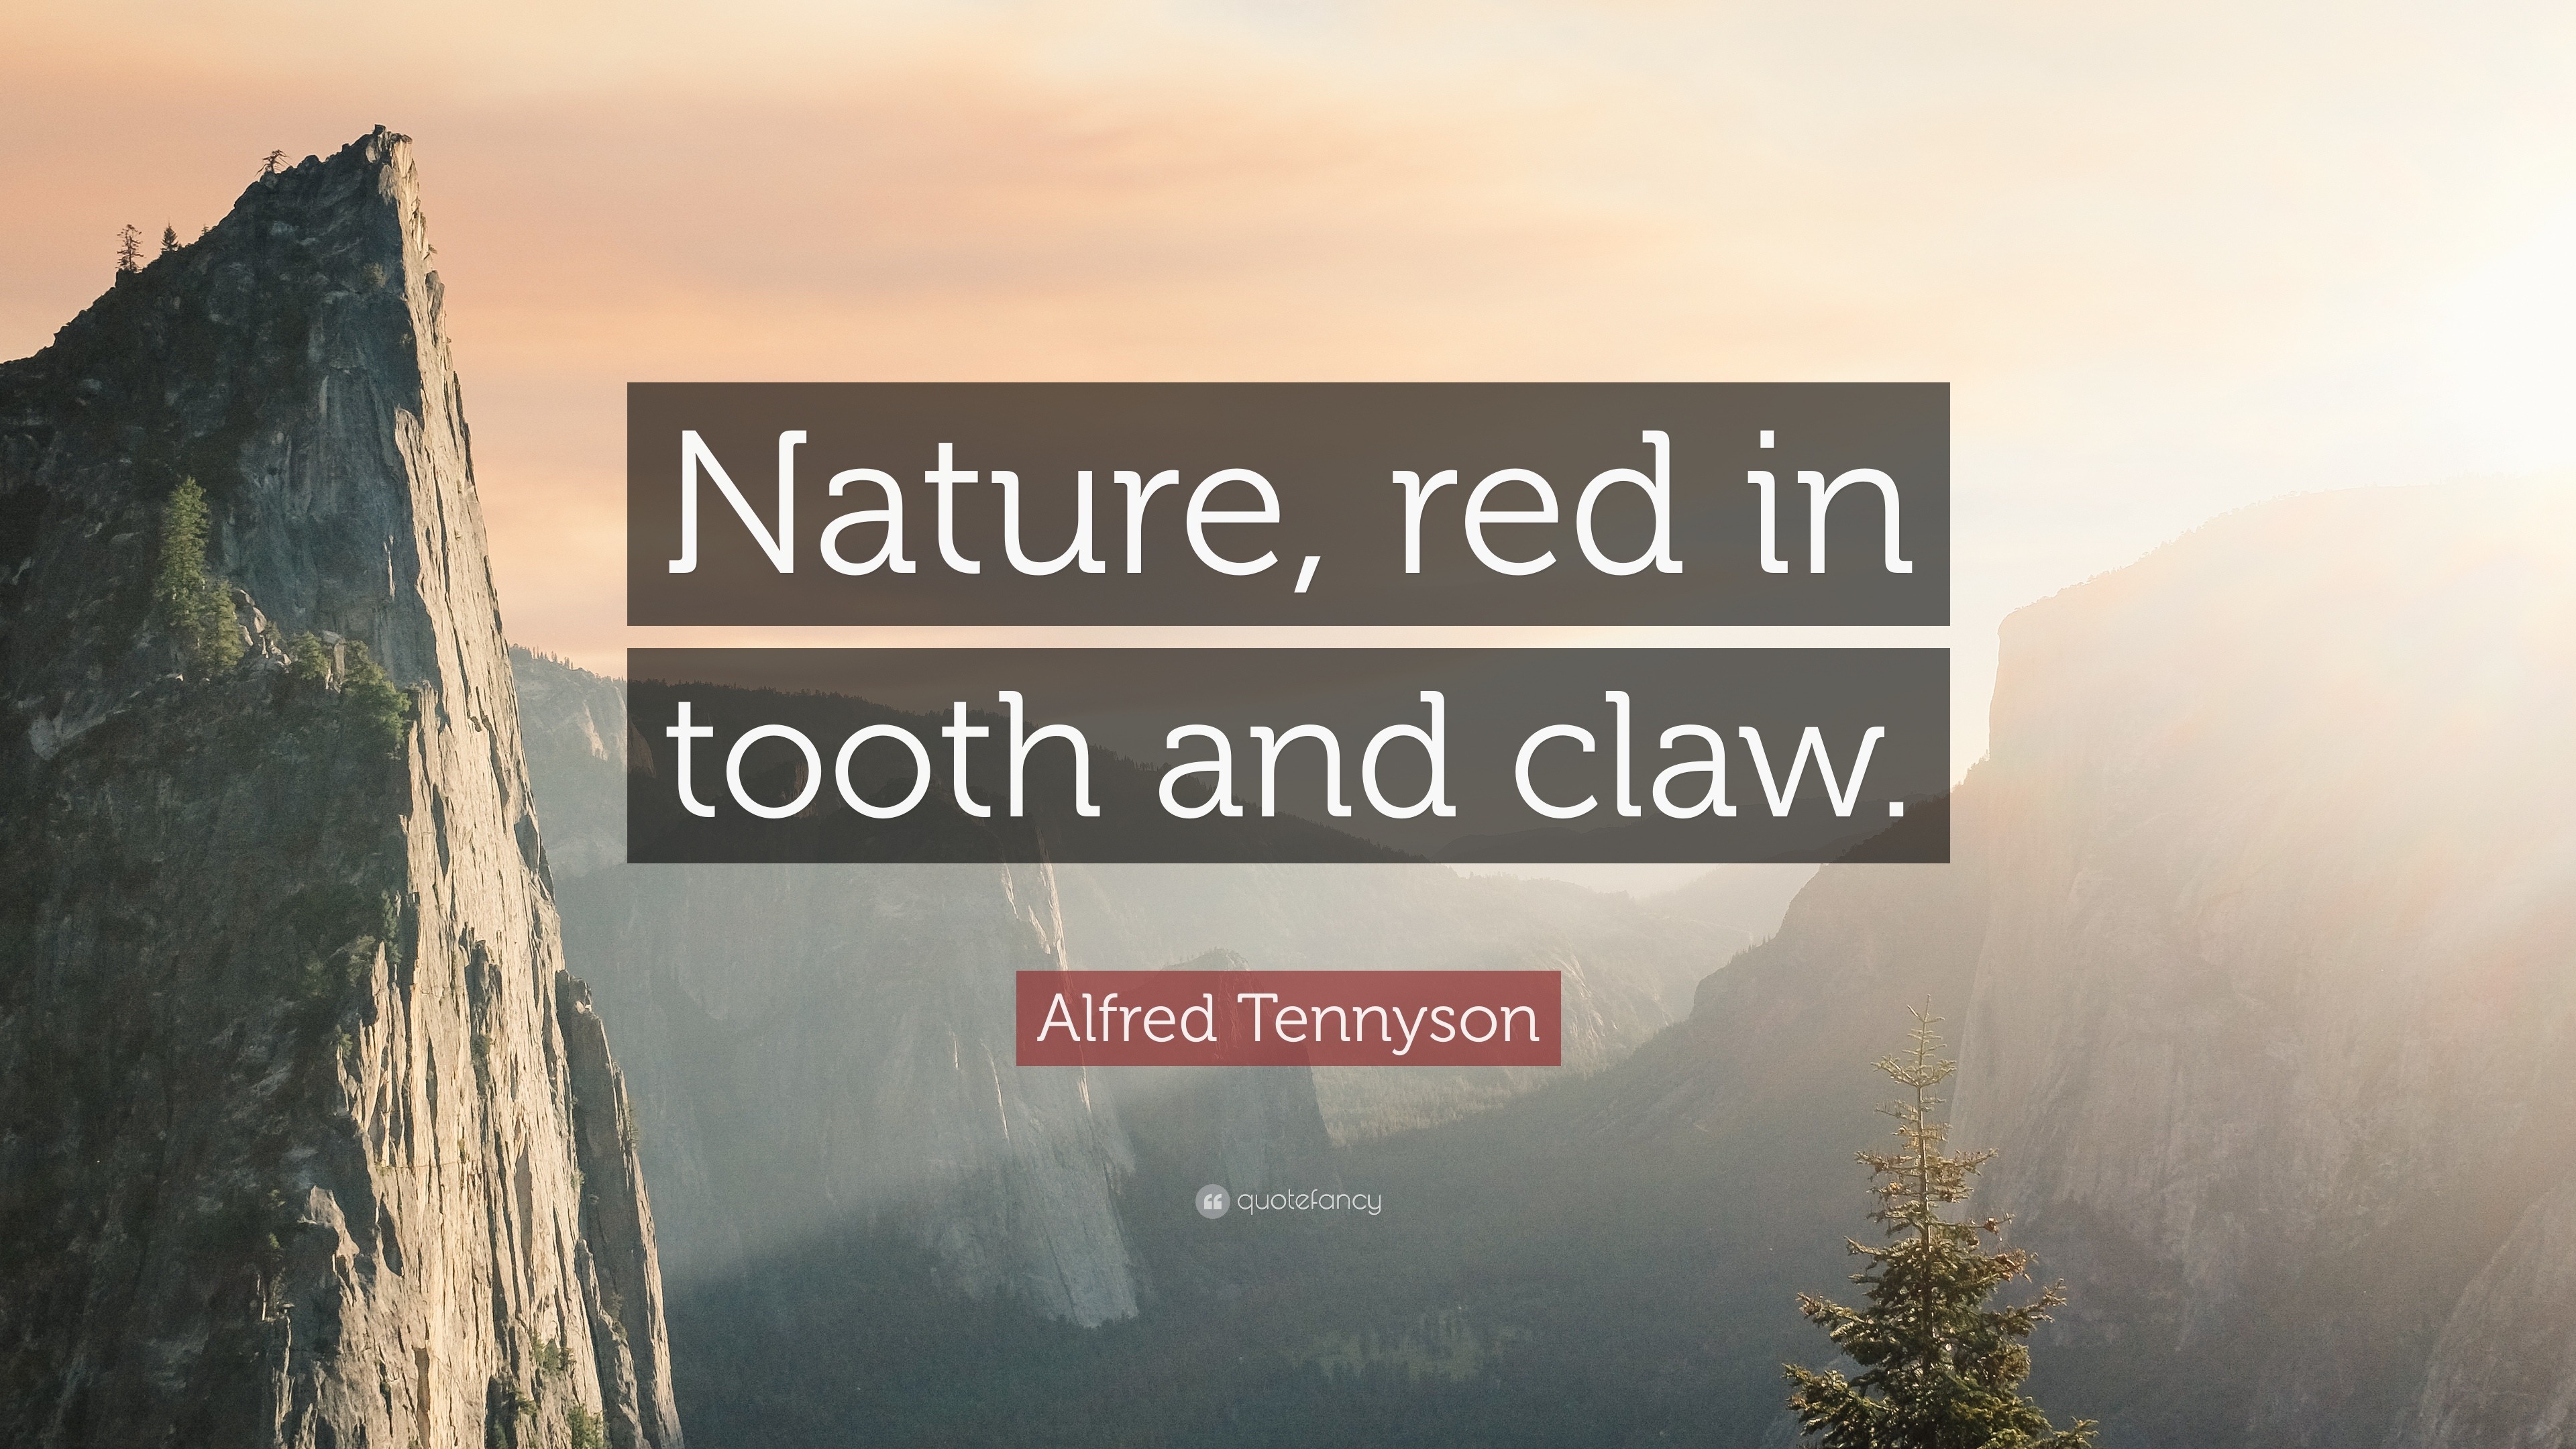 Alfred Tennyson Quote: “Nature, red in tooth and